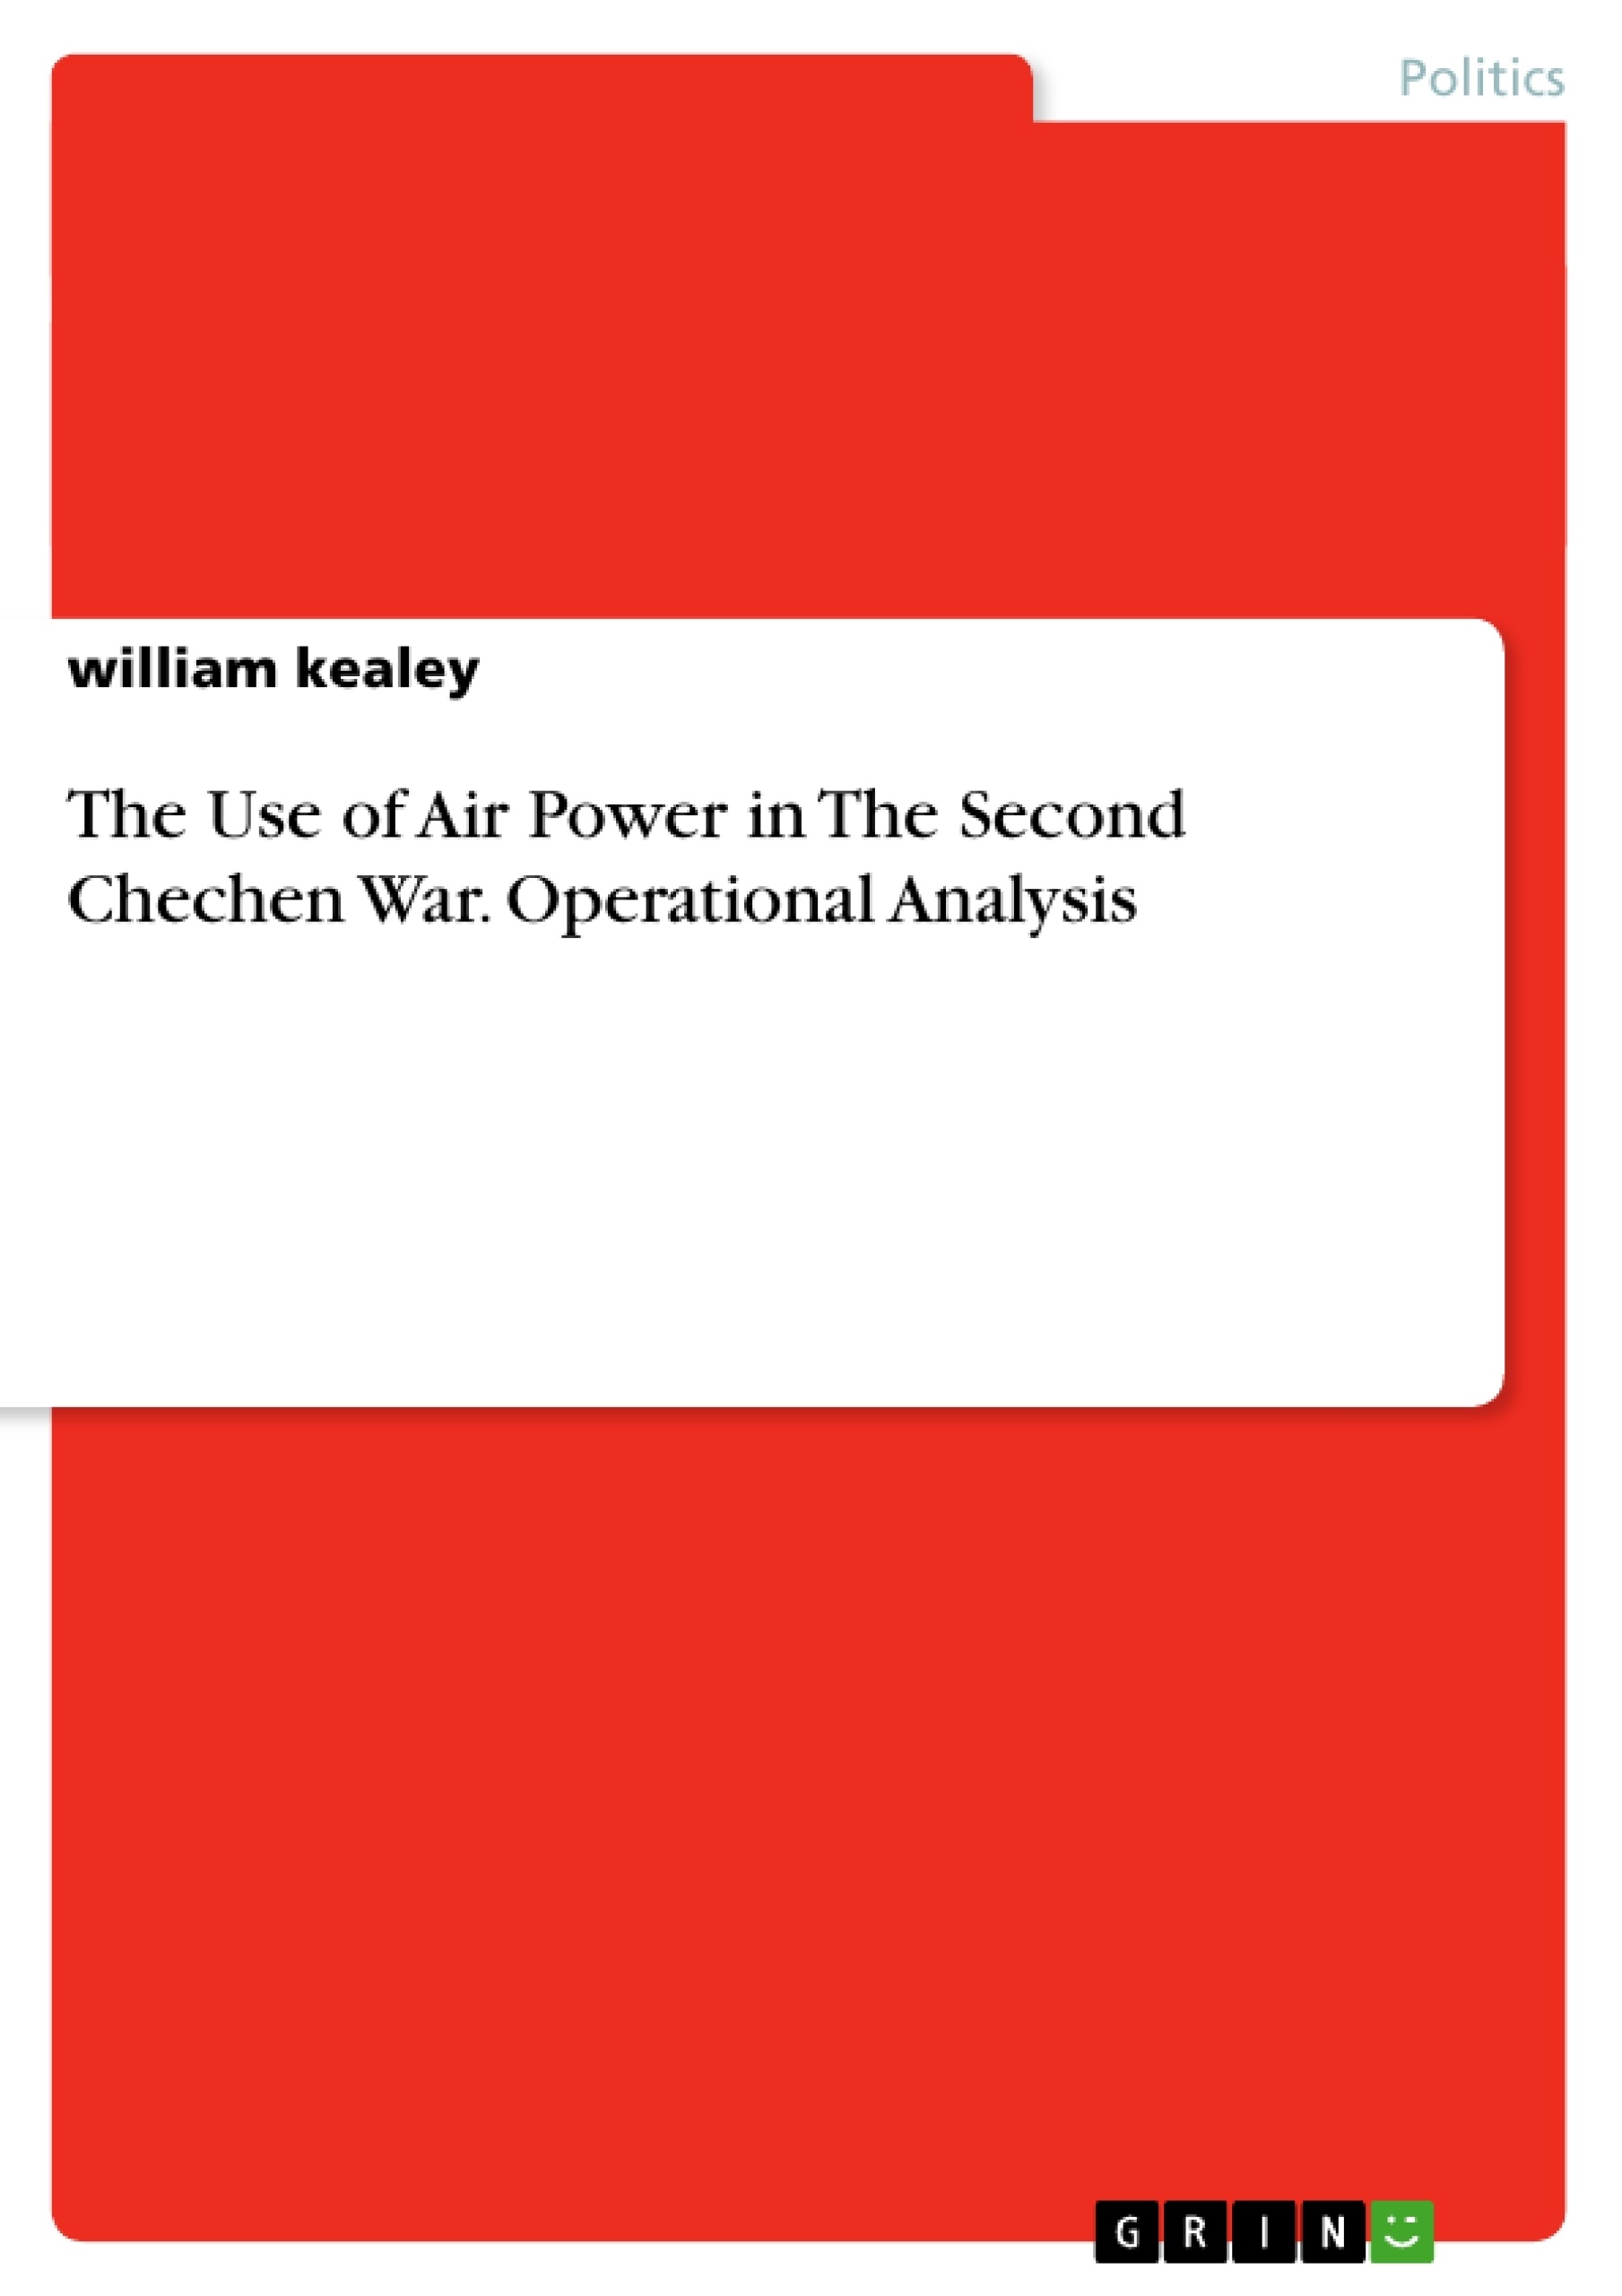 Título: The Use of Air Power in The Second Chechen War. Operational Analysis